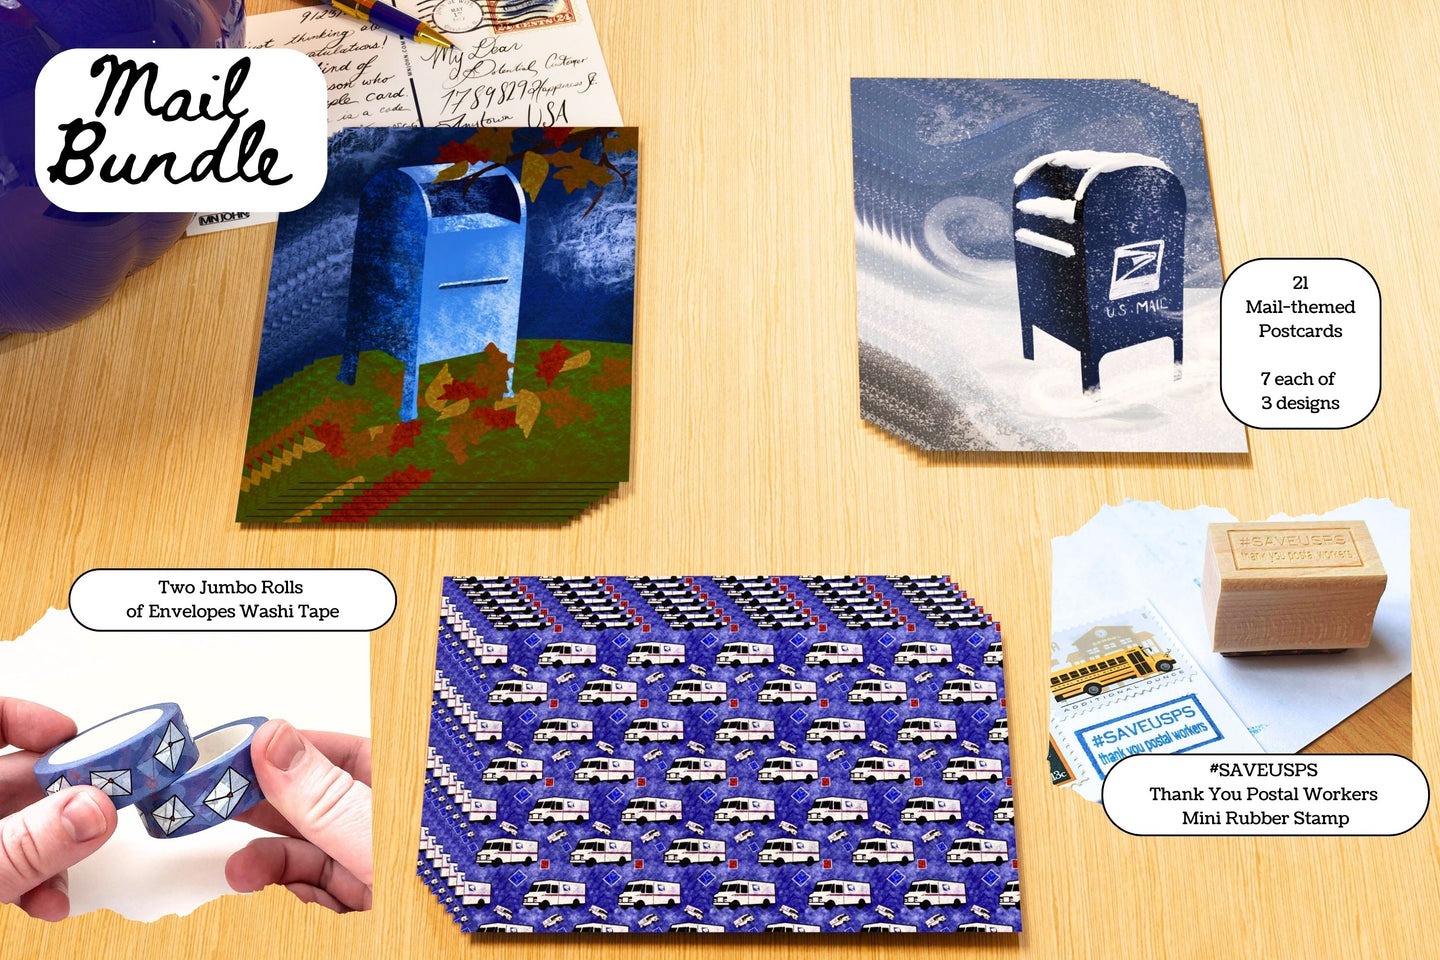 Mail Bundle - 21 Mail-Themed Postcards, Two Rolls of Washi Tape and a SAVEUSPS Rubber Stamp